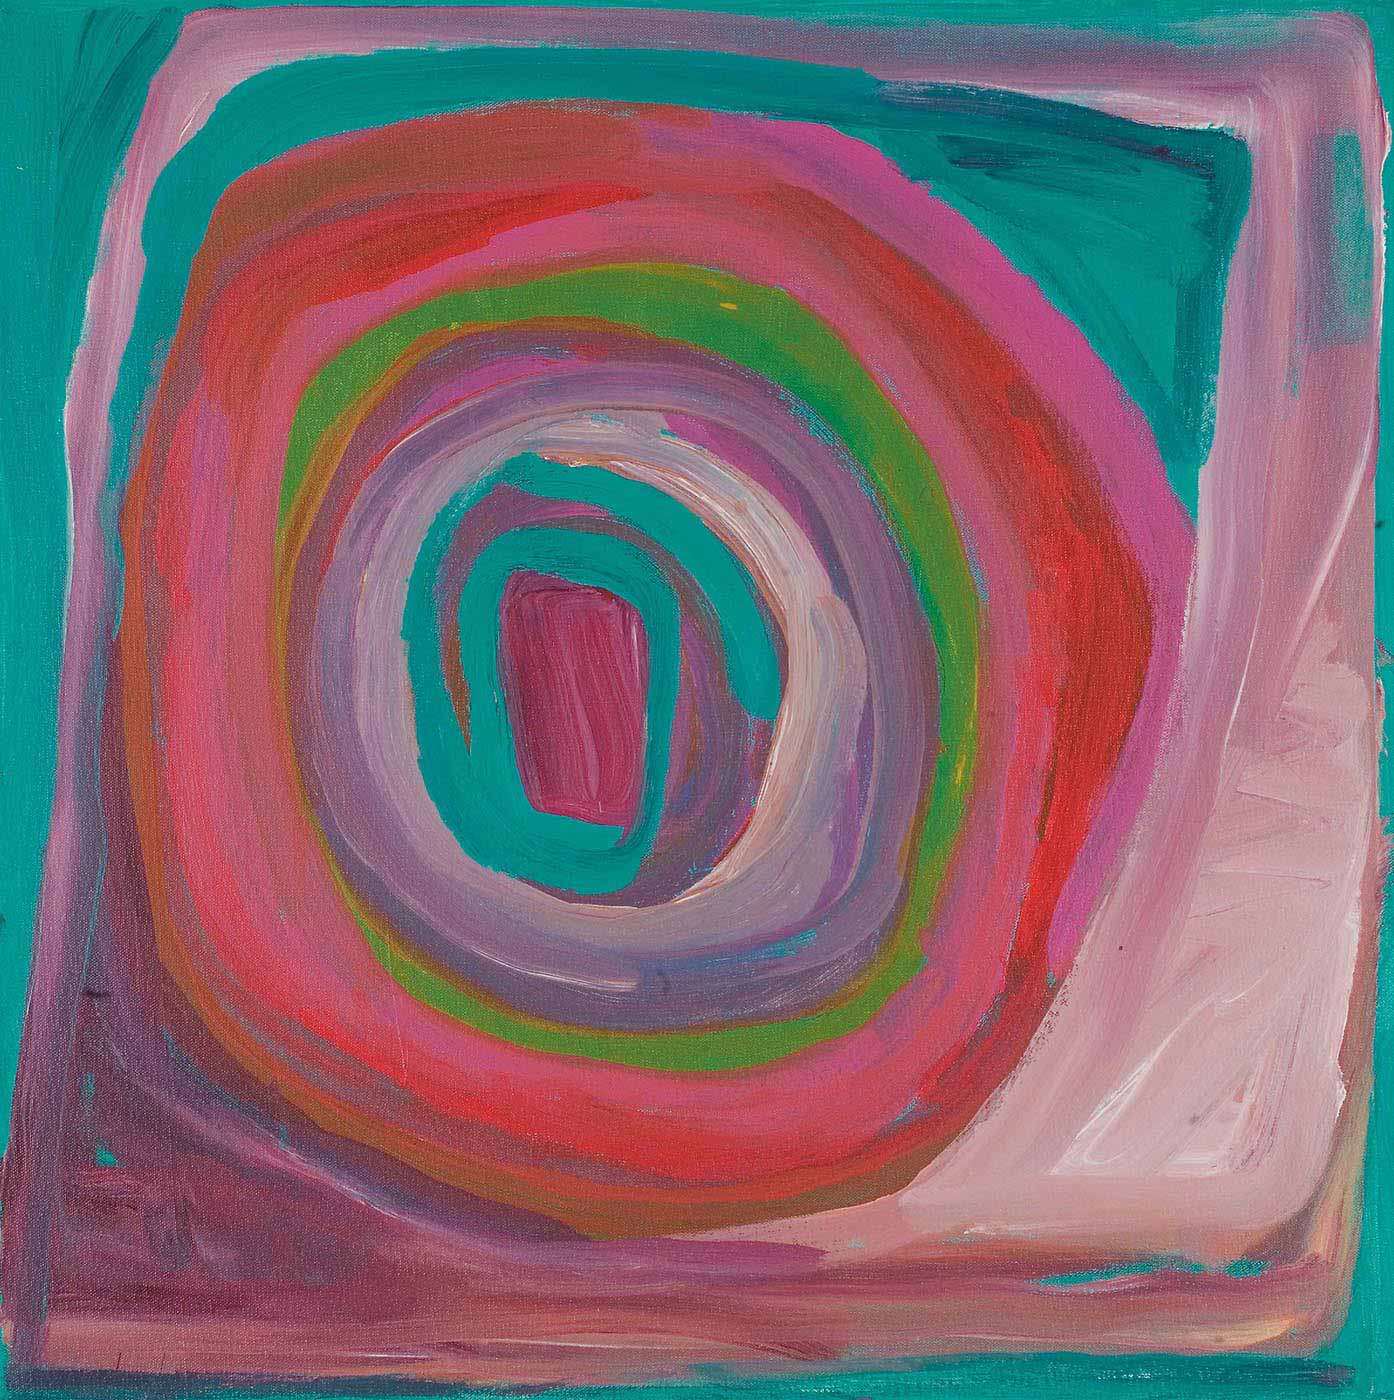 A multicoloured concentric circle painted within a square border on canvas. Colours include turquoise, pink, red, green, blue, and shades of purple. - click to view larger image